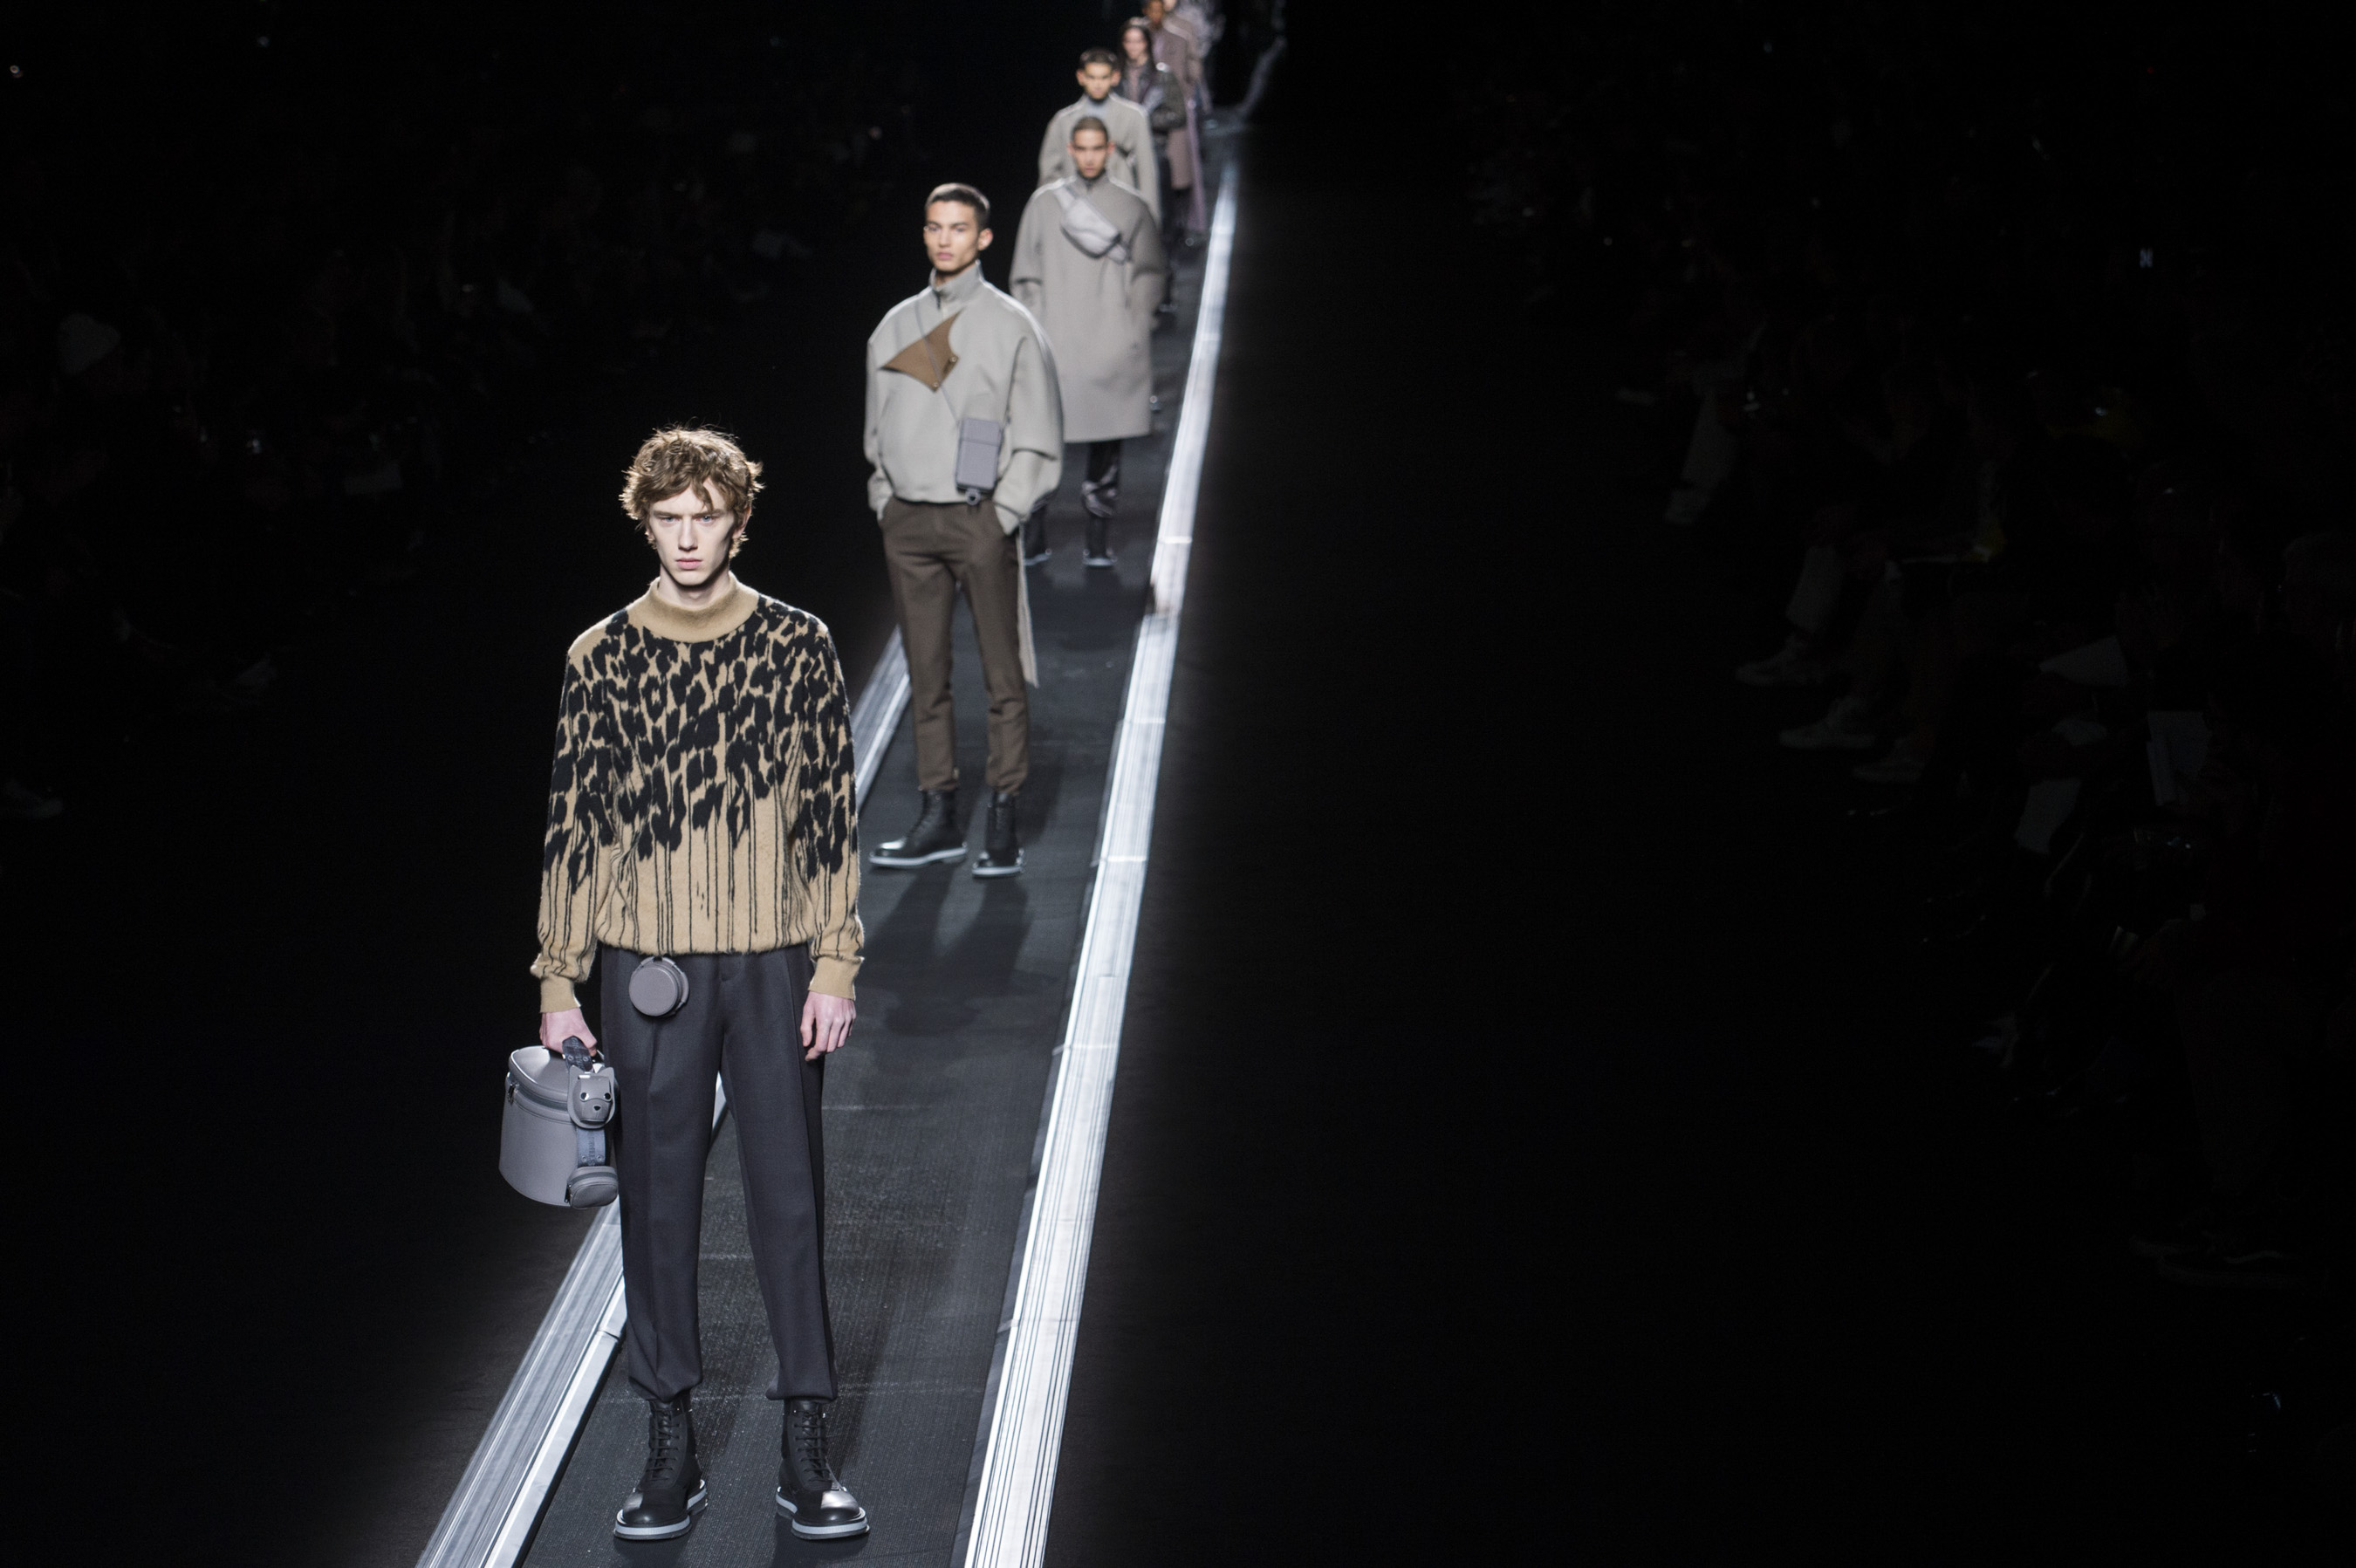 Top 10 Fall 2019 Men's Fashion Shows. The Impression ranks the menswear runway collections with their favorite men's fashion shows